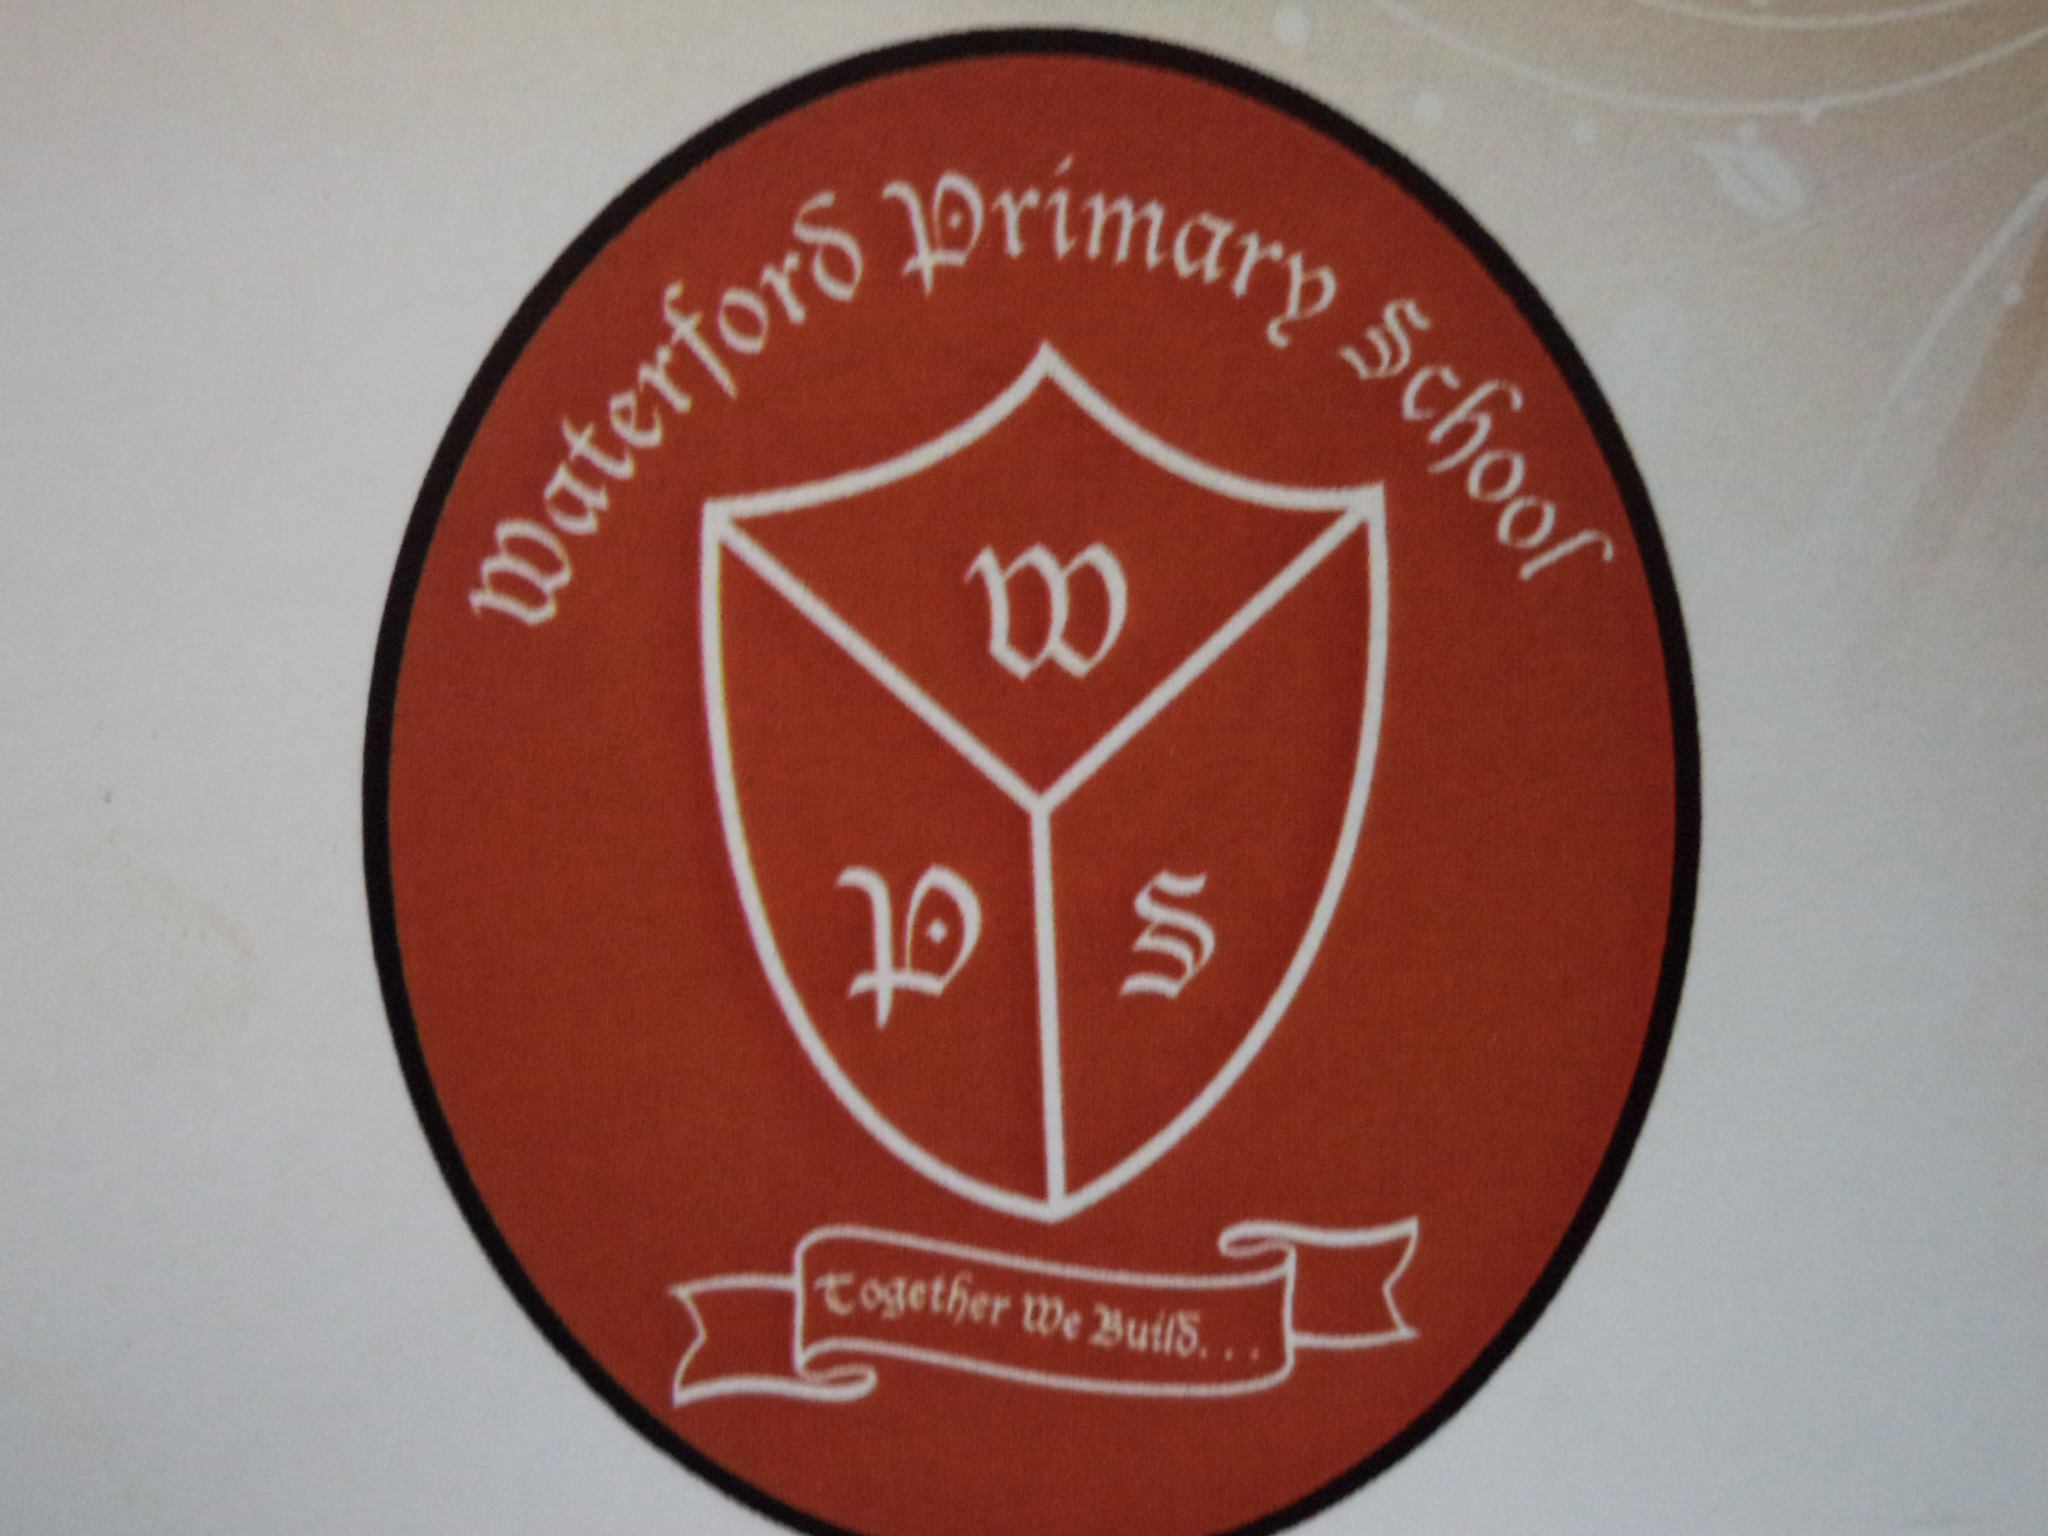 Waterford Primary School